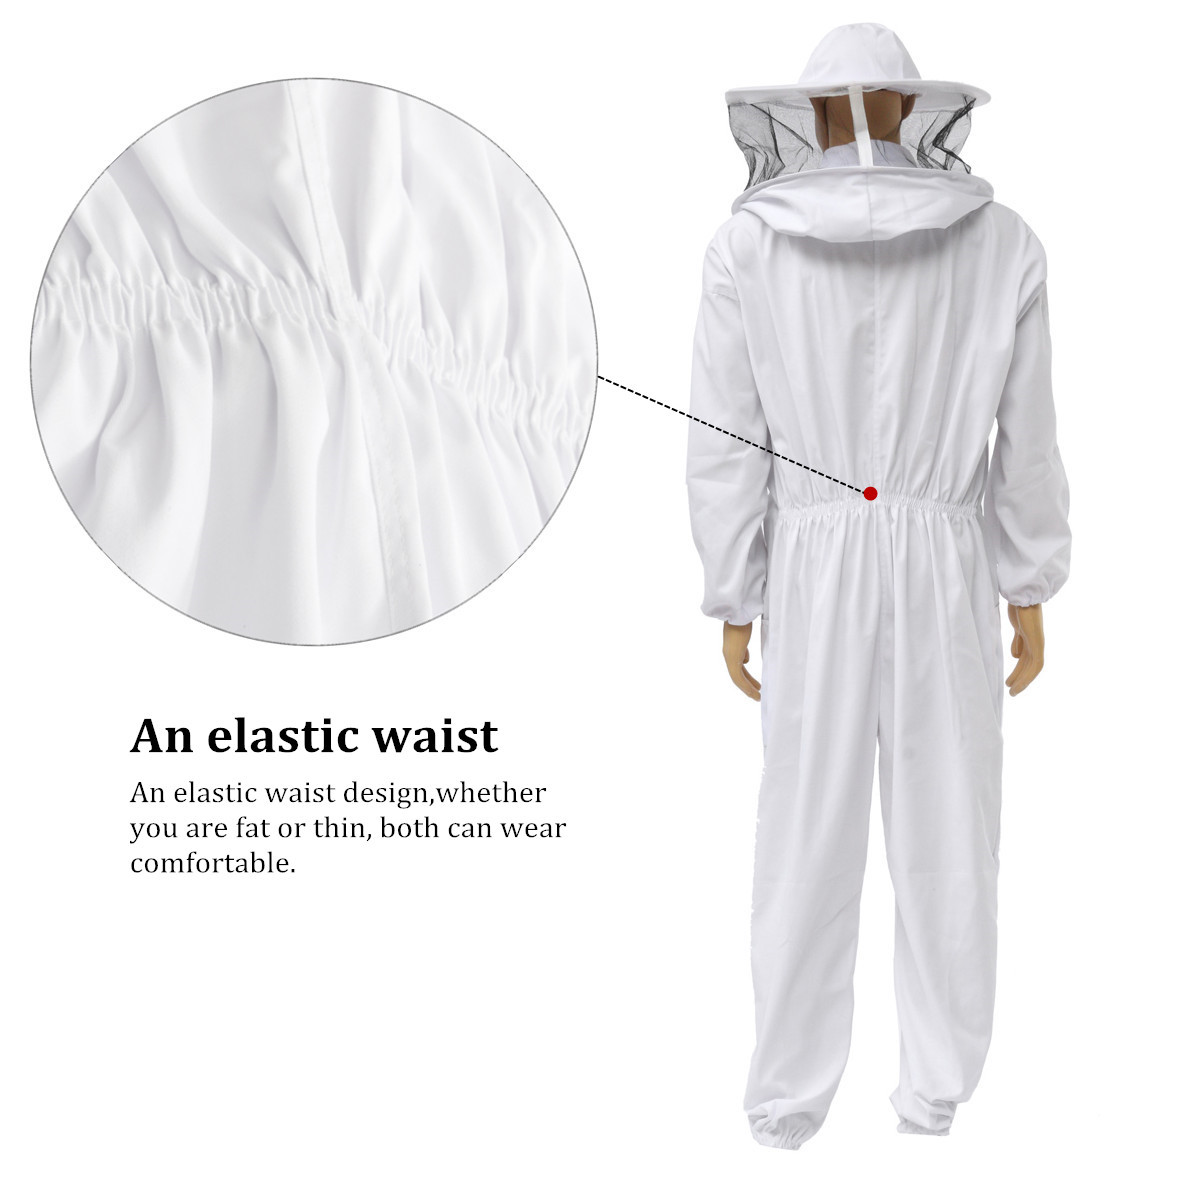 Beekeepers-Bee-Keeping-Cotton-Full-Protector-Suit-With-Veil-Hat-Hood-Bee-Suit-XL-XXL-XXL-1277290-4